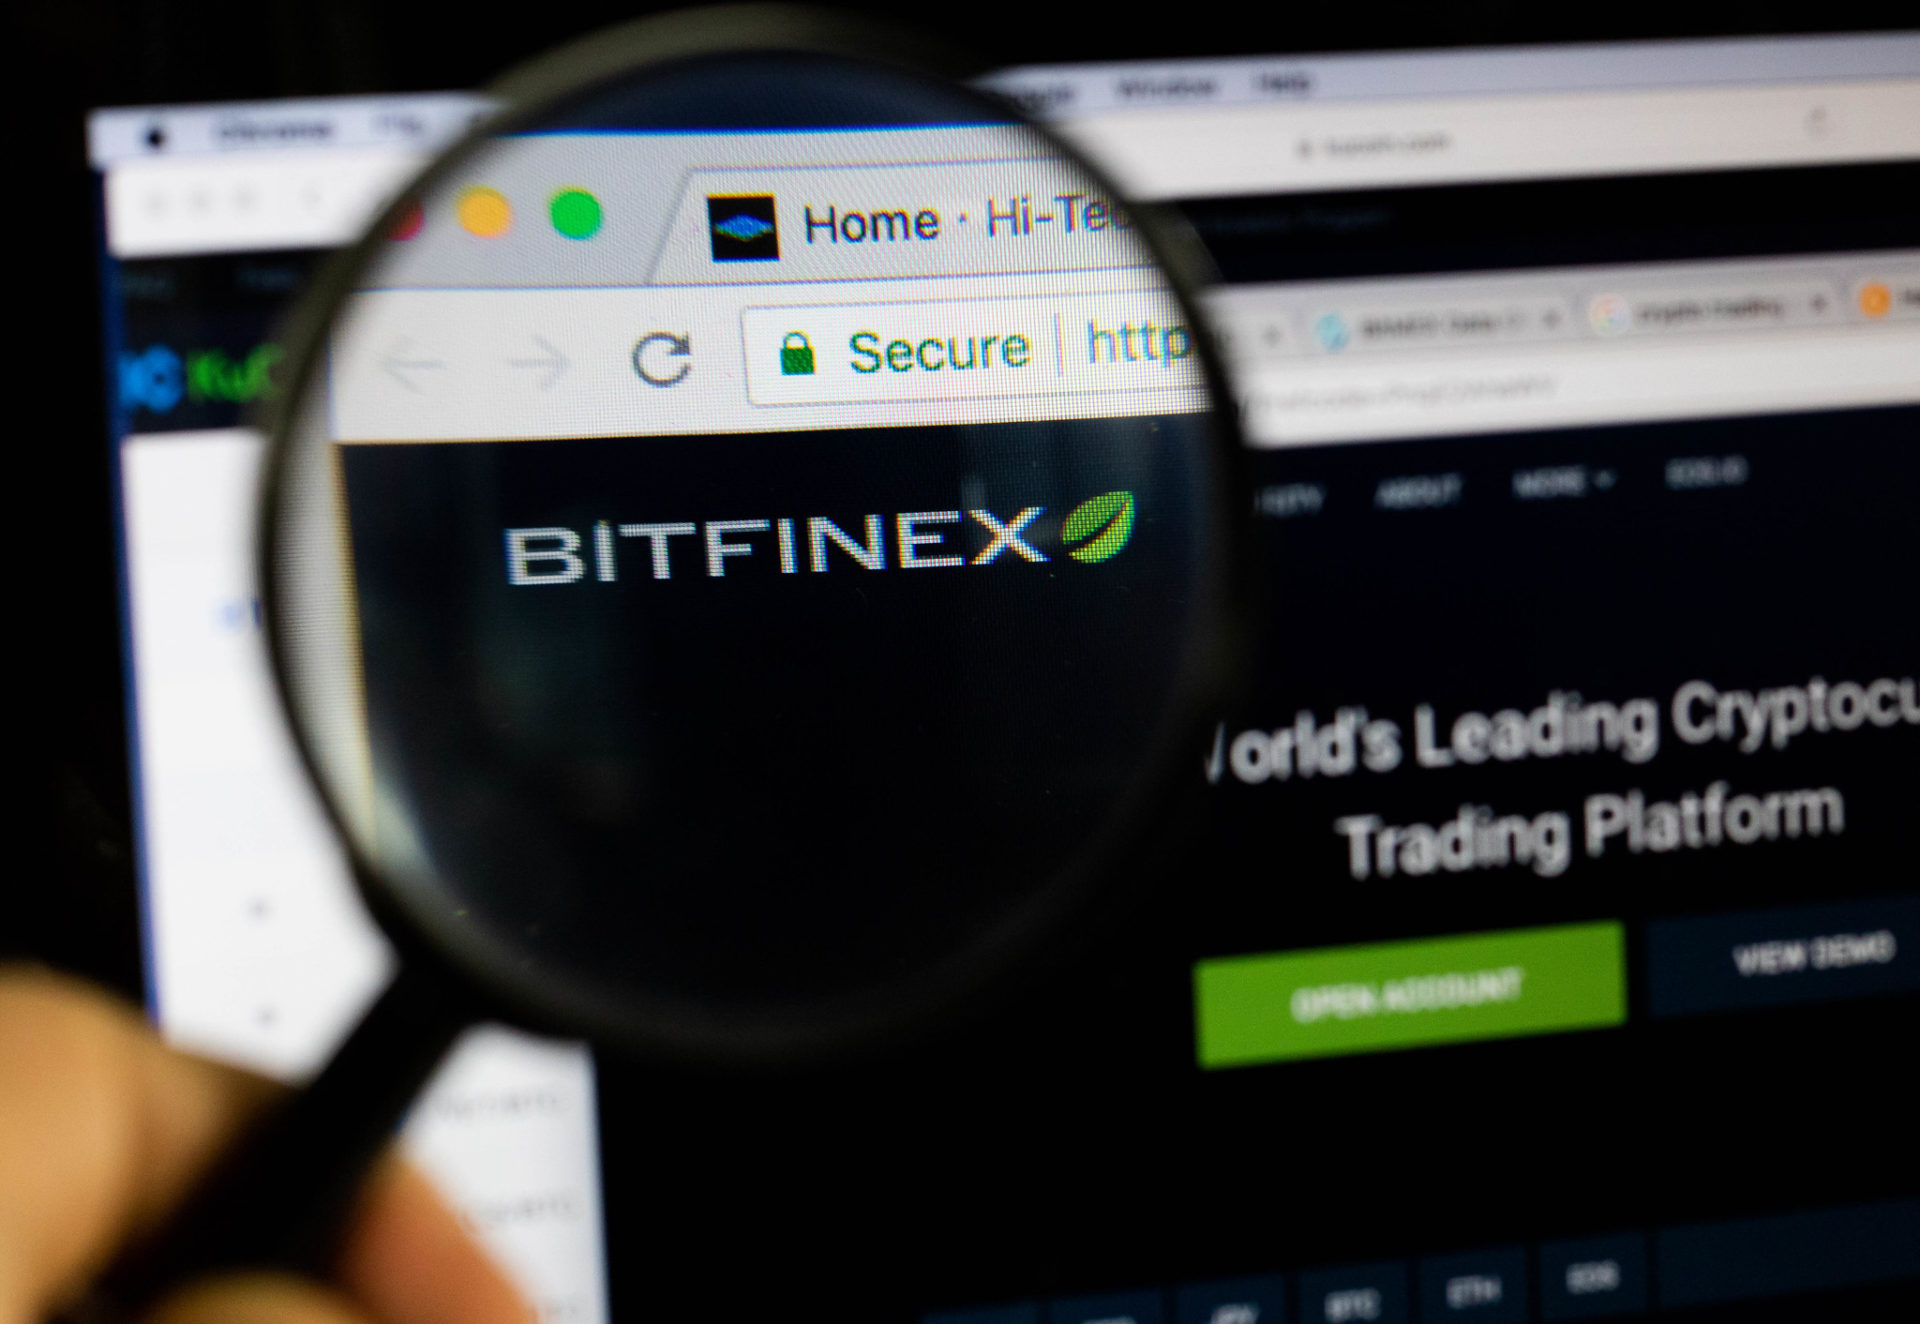 Joseph Lubin on Tether-Bitfinex Debacle: "It seems like a really big mess that probably won’t get better" 10